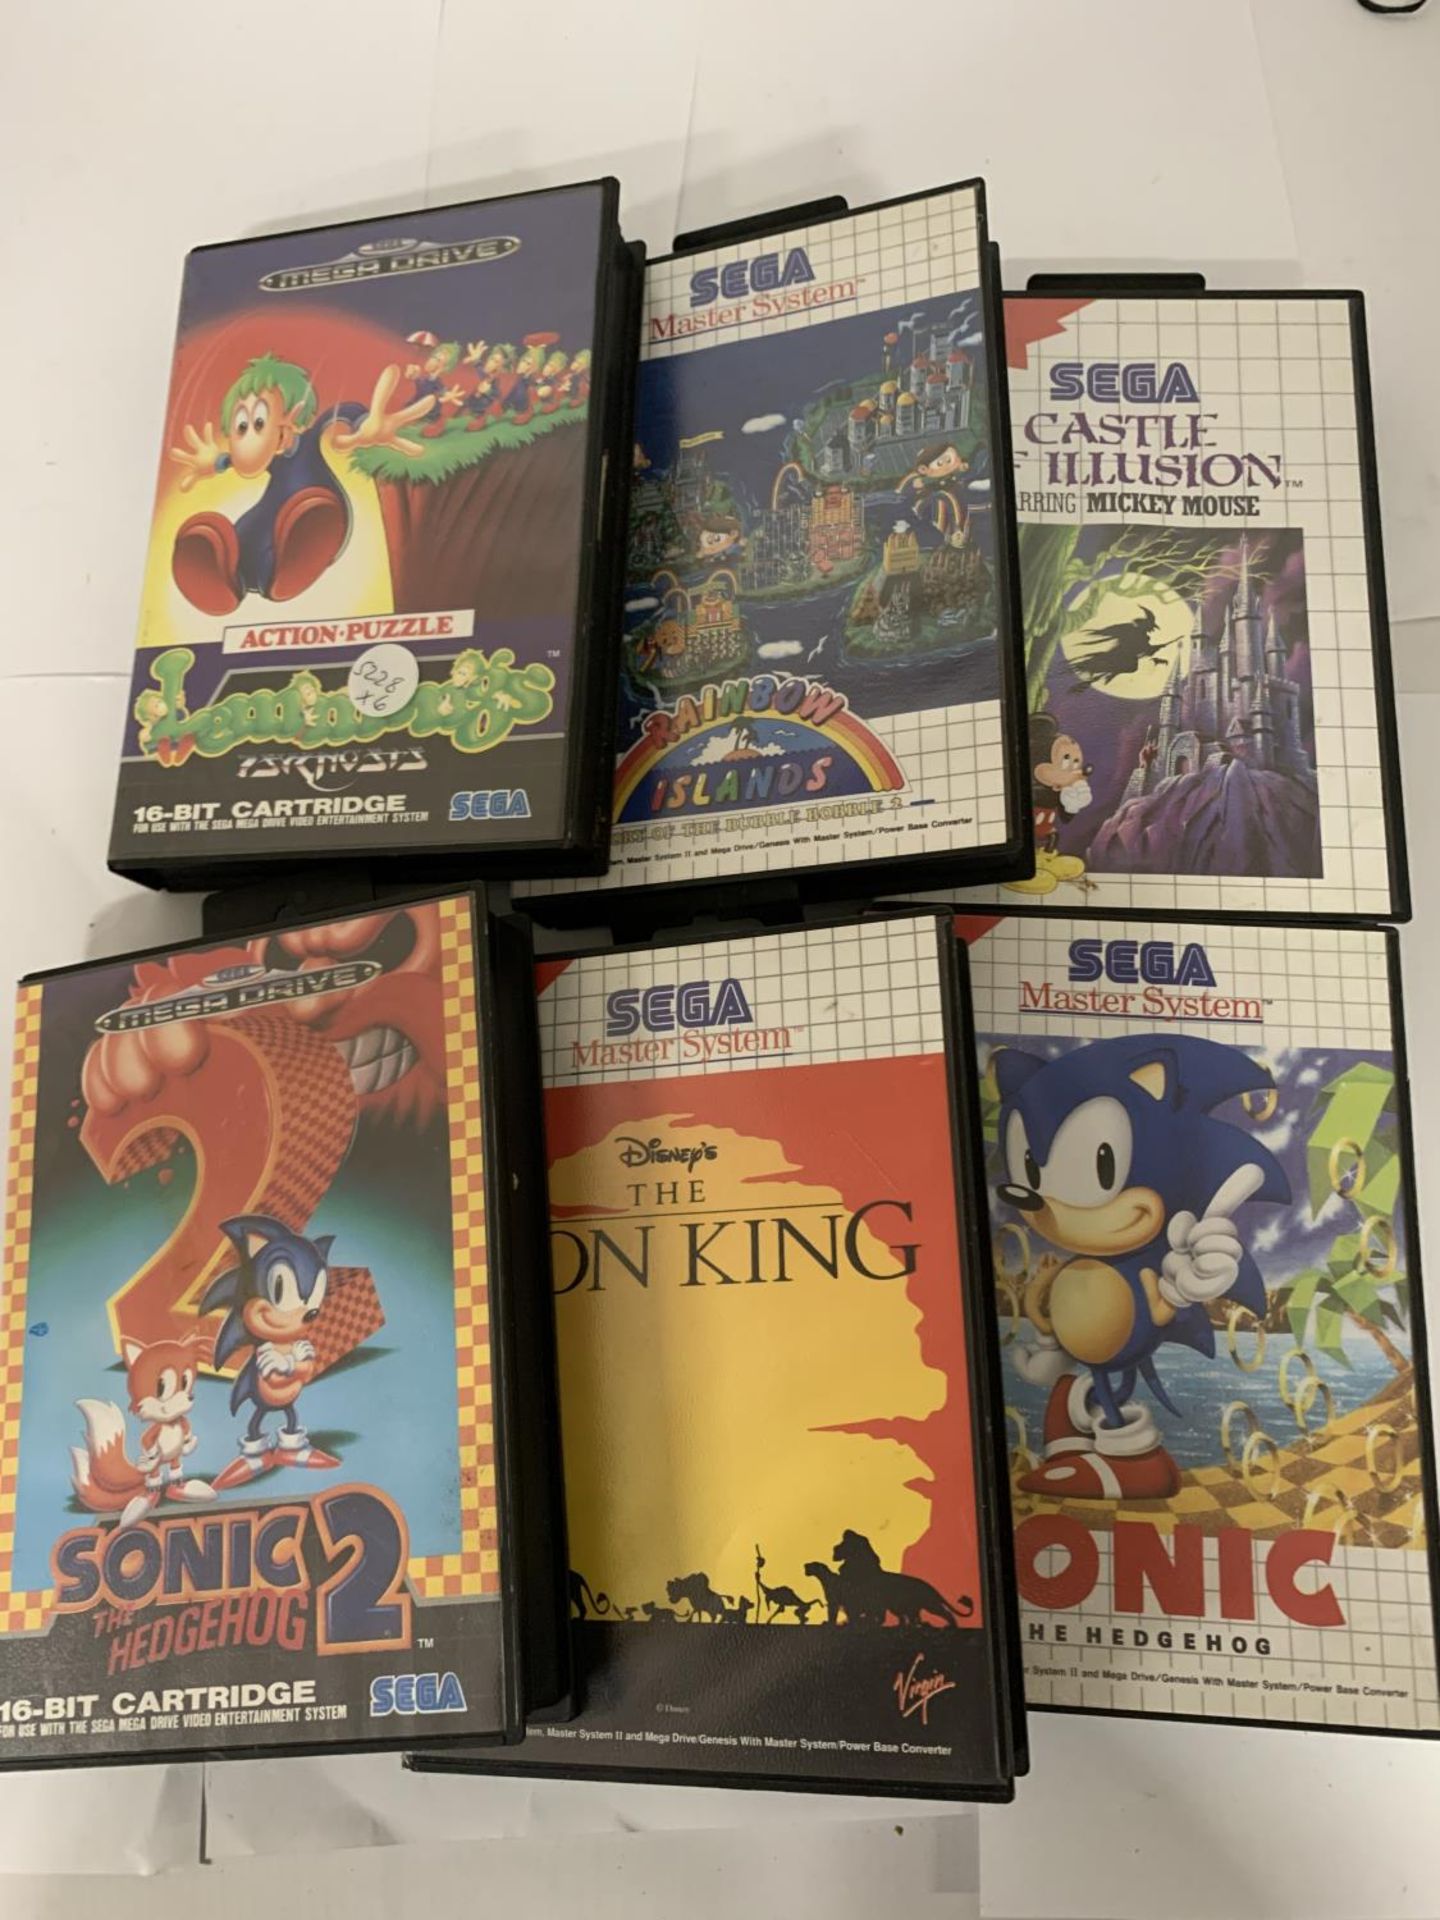 SIX BOXED GAMES TO INCLUDE SONIC THE HEDGEHGOG 2, SONIC THE HEDGEHOG, THE LION KING. SEGA CASTLE